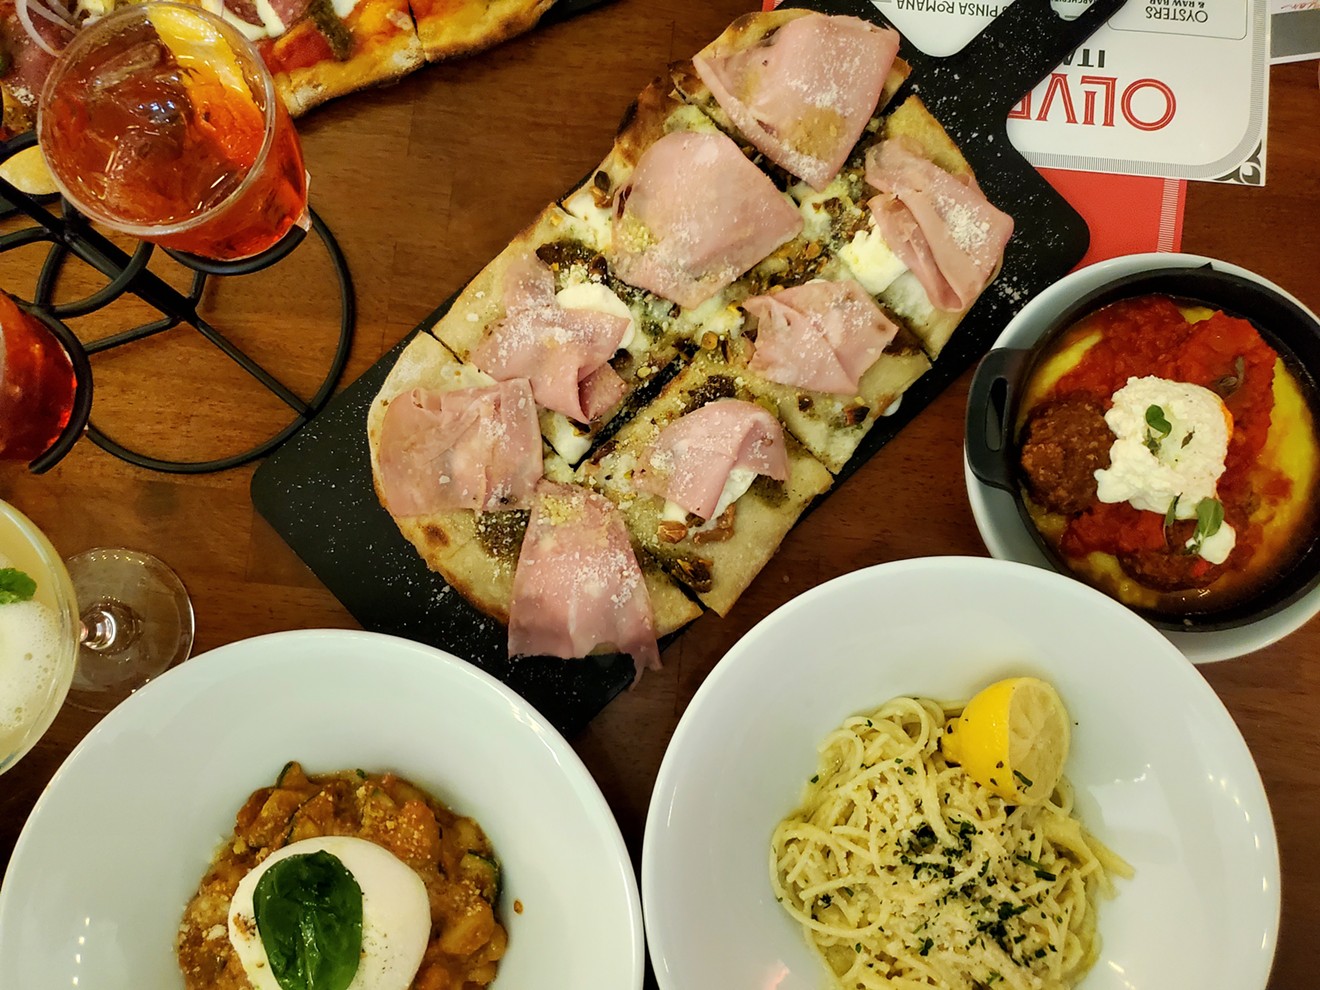 A spread of Italian eats from Oliver's, which debuts October 30.